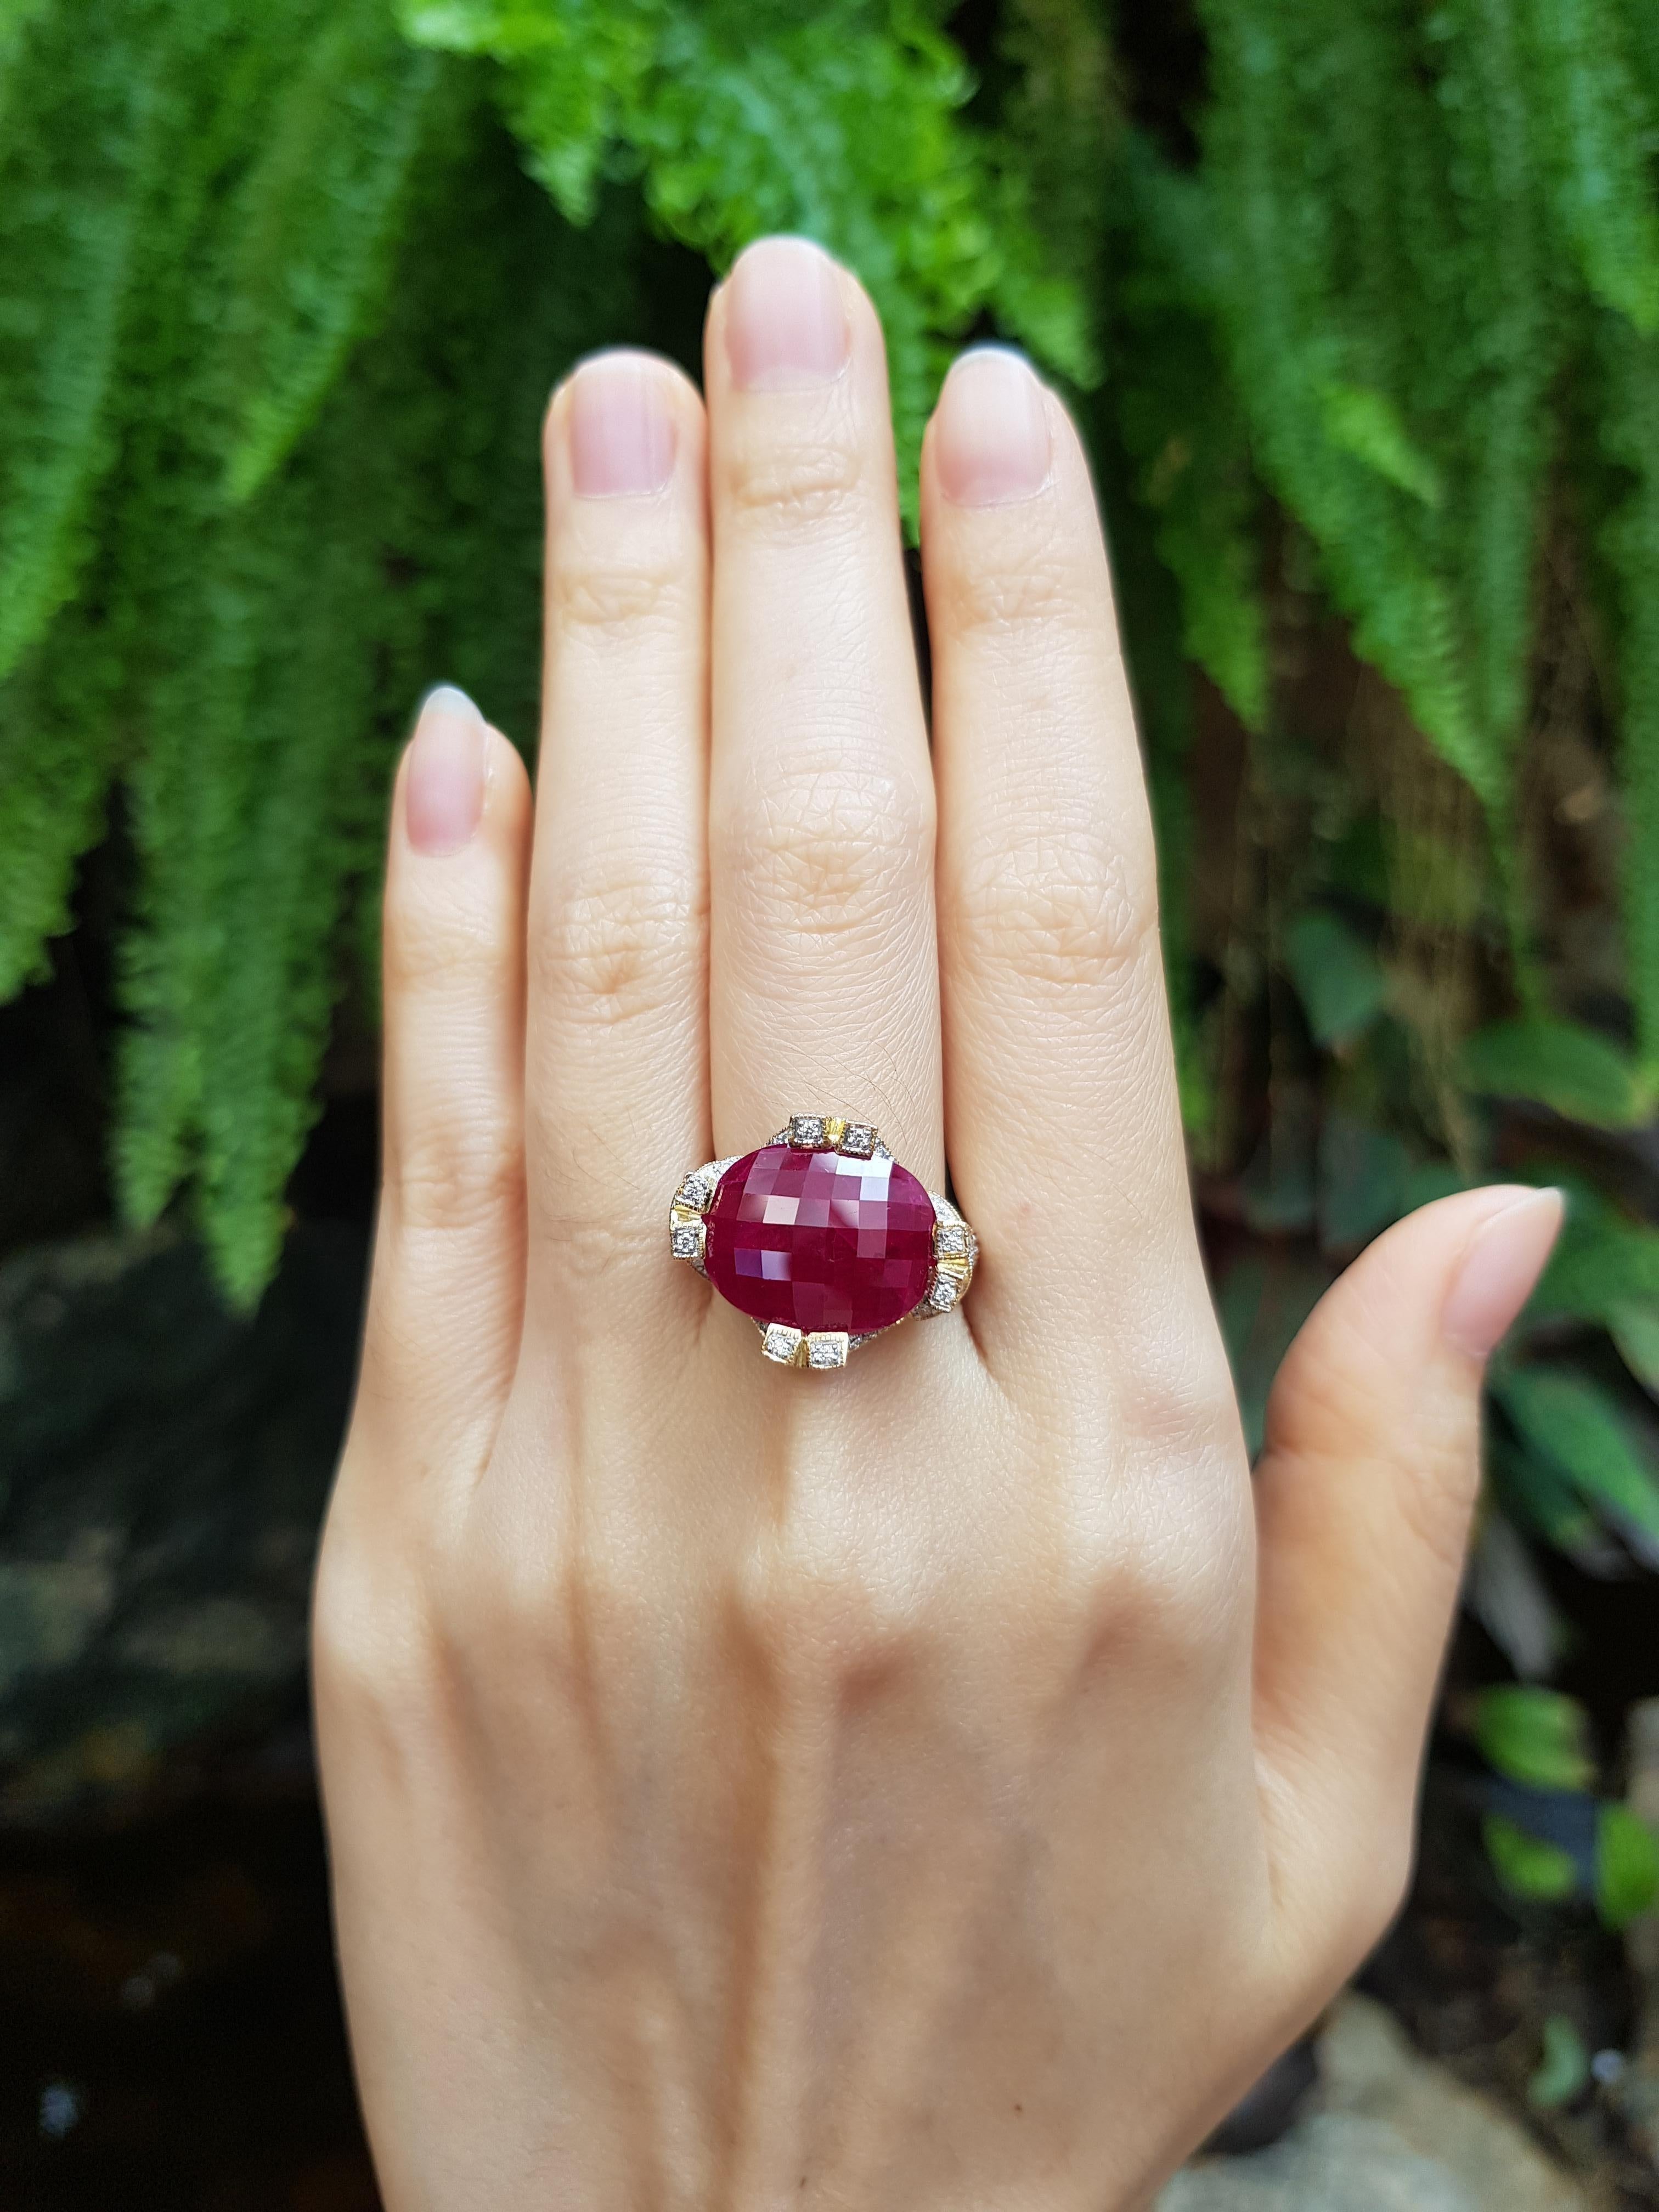 Ruby 7.75 carats with Diamond 0.94 carat Ring set in 18 Karat Gold Settings

Width: 2.0 cm
Length: 1.7 cm 
Ring Size: 53

